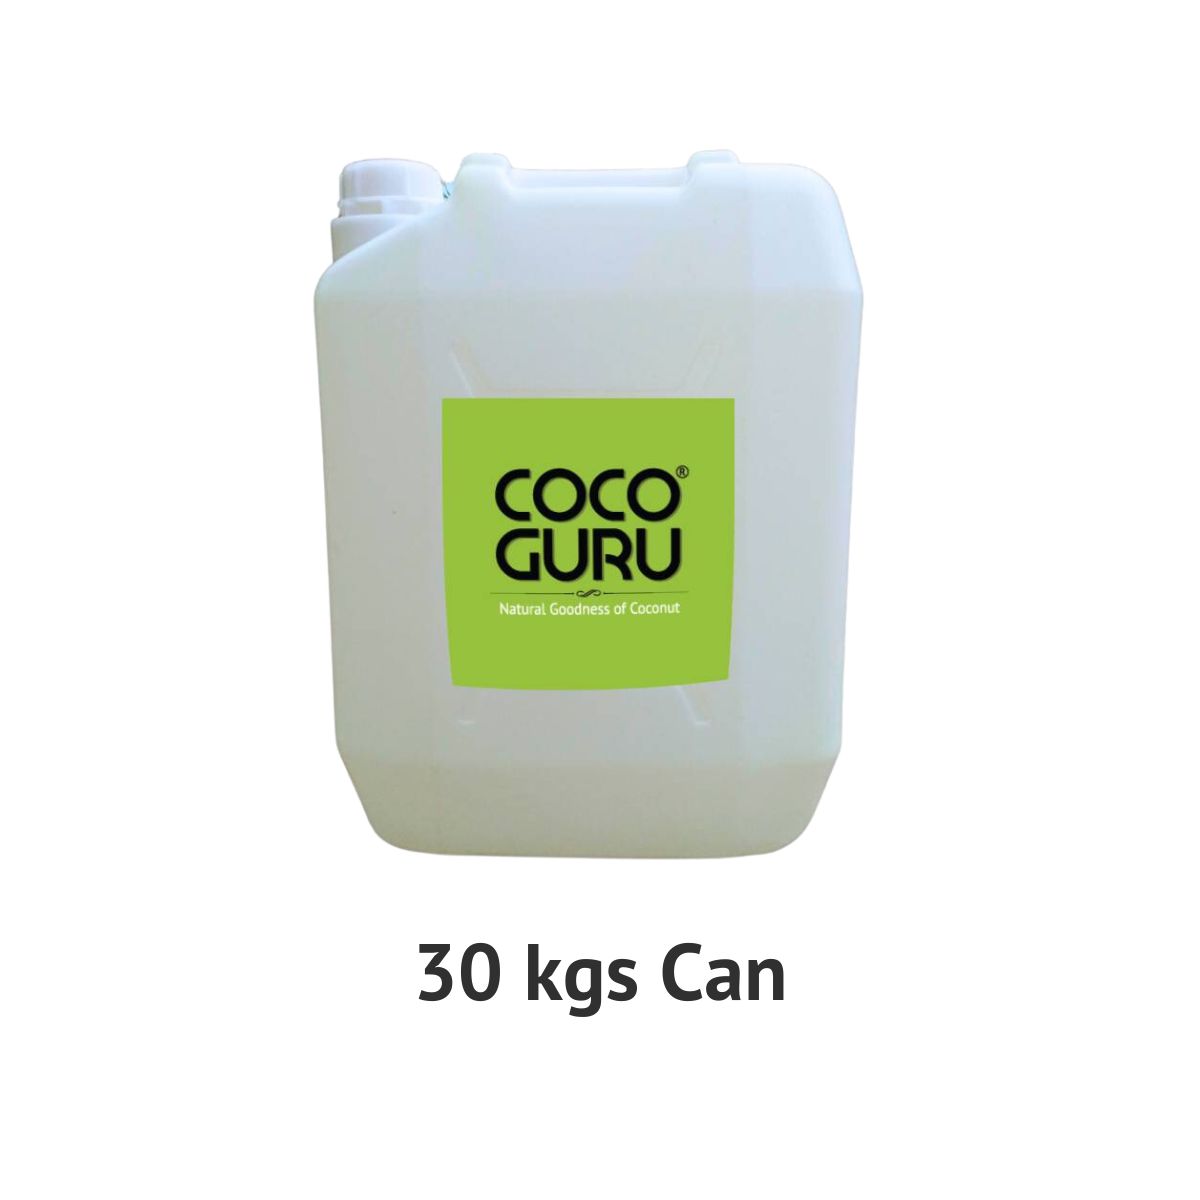 Roasted Coconut Oil in 30 kg Can